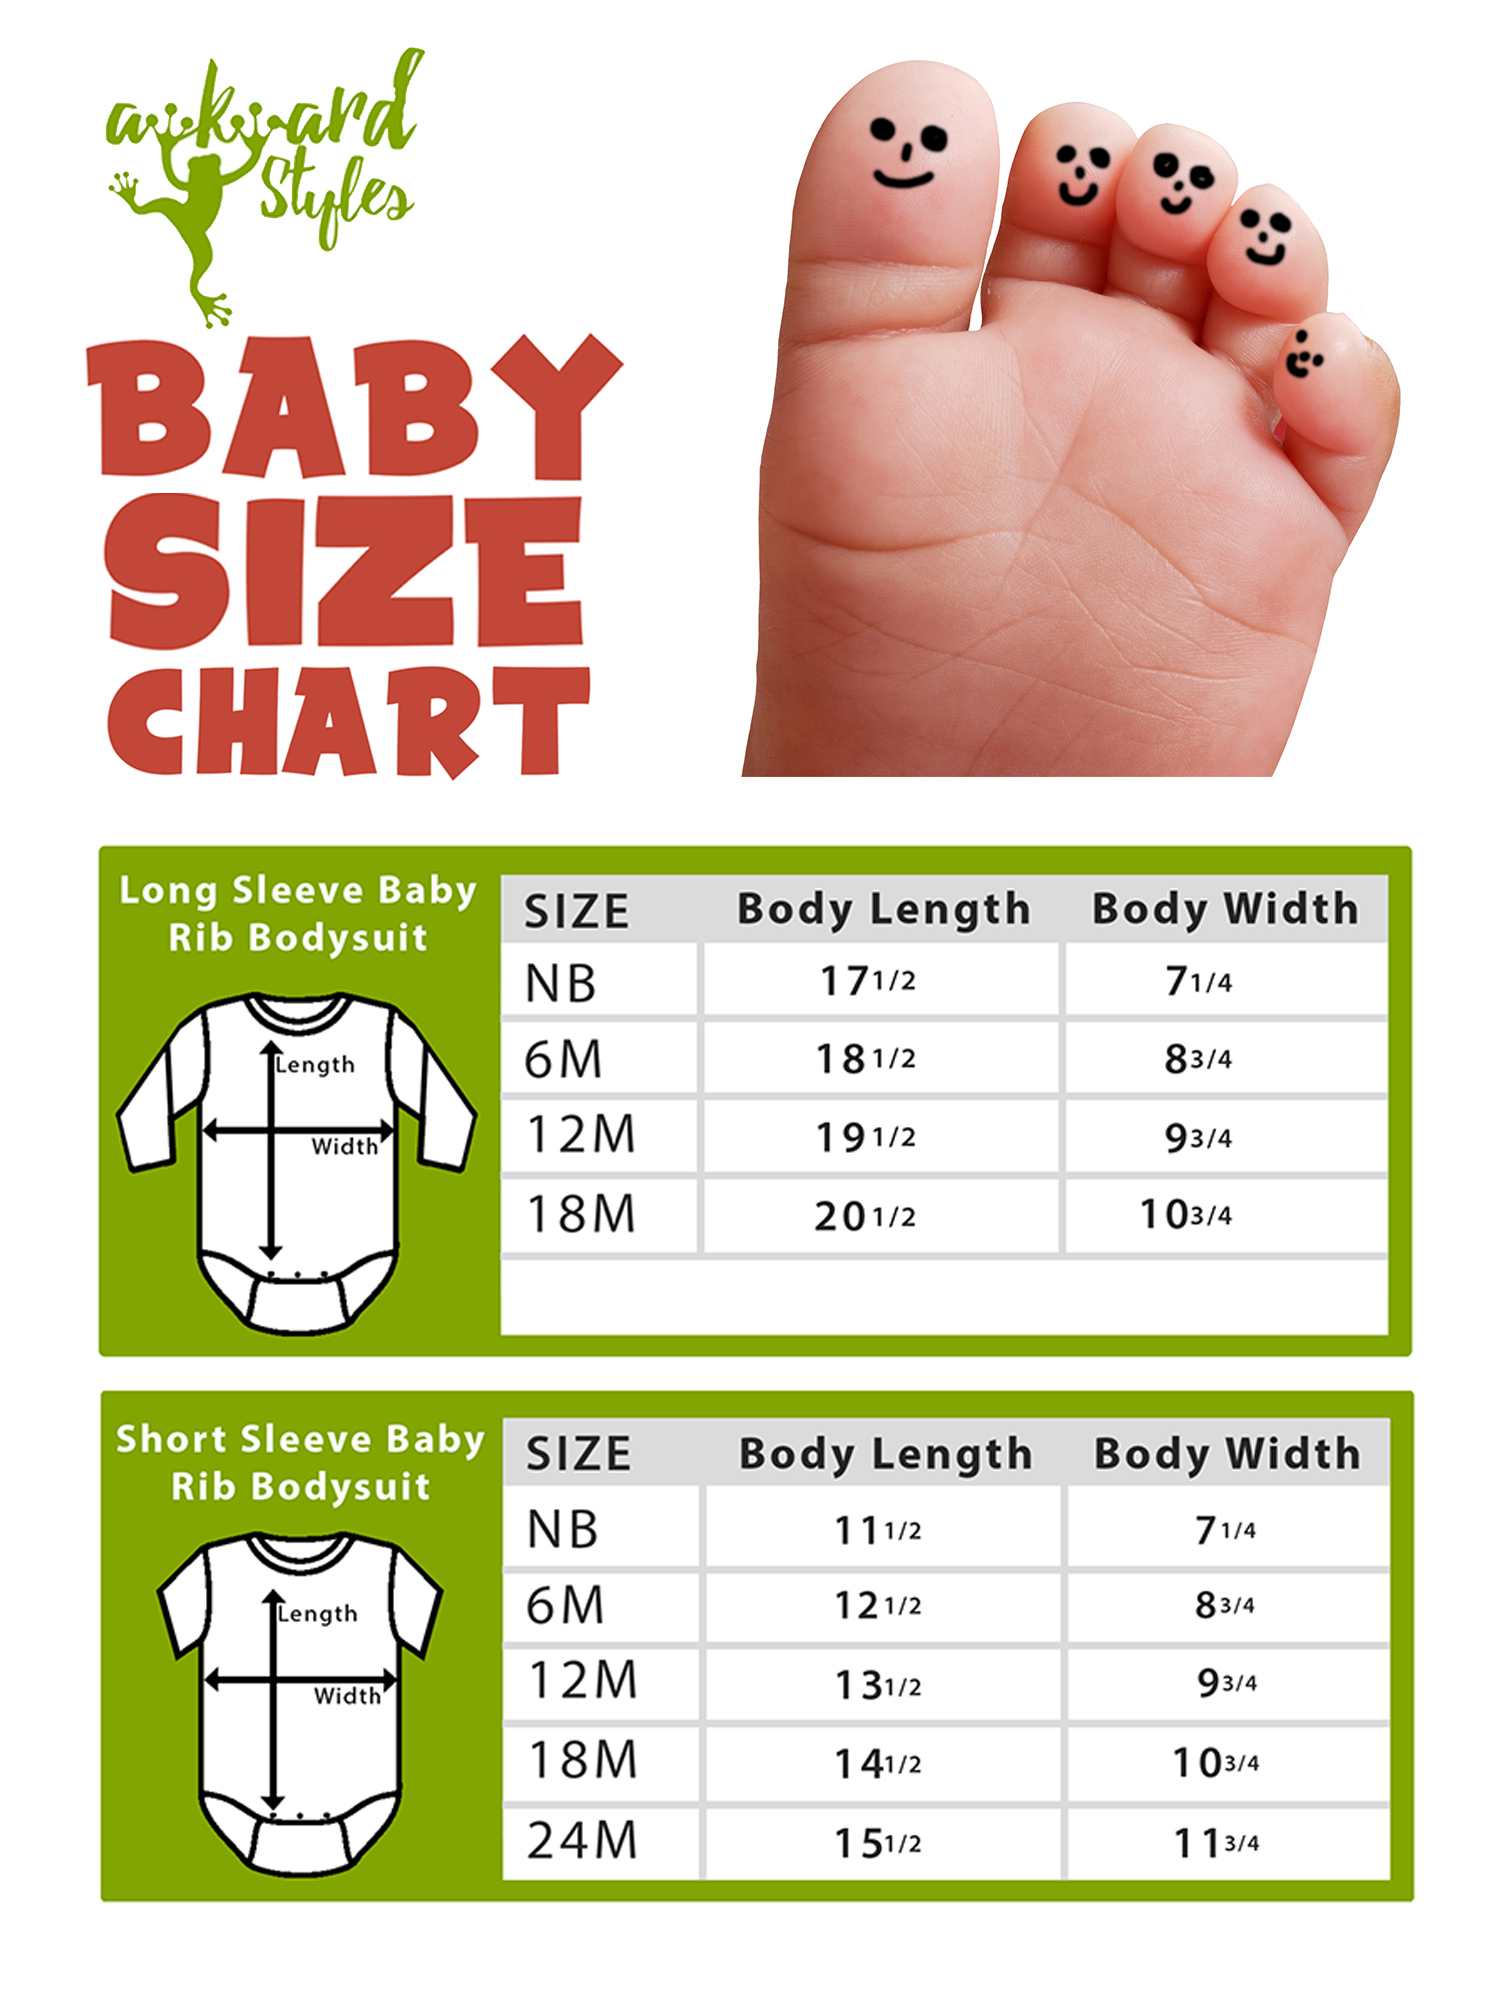 Awkward Styles Twin Bodysuit Short Sleeve for Newborn Baby Cute Twins Gifts for 1 Year Old I Love My Twin One Piece Top for Baby Boy I Love My Twin One Piece Top for Baby Girl Birthday Party Outfit - image 4 of 4